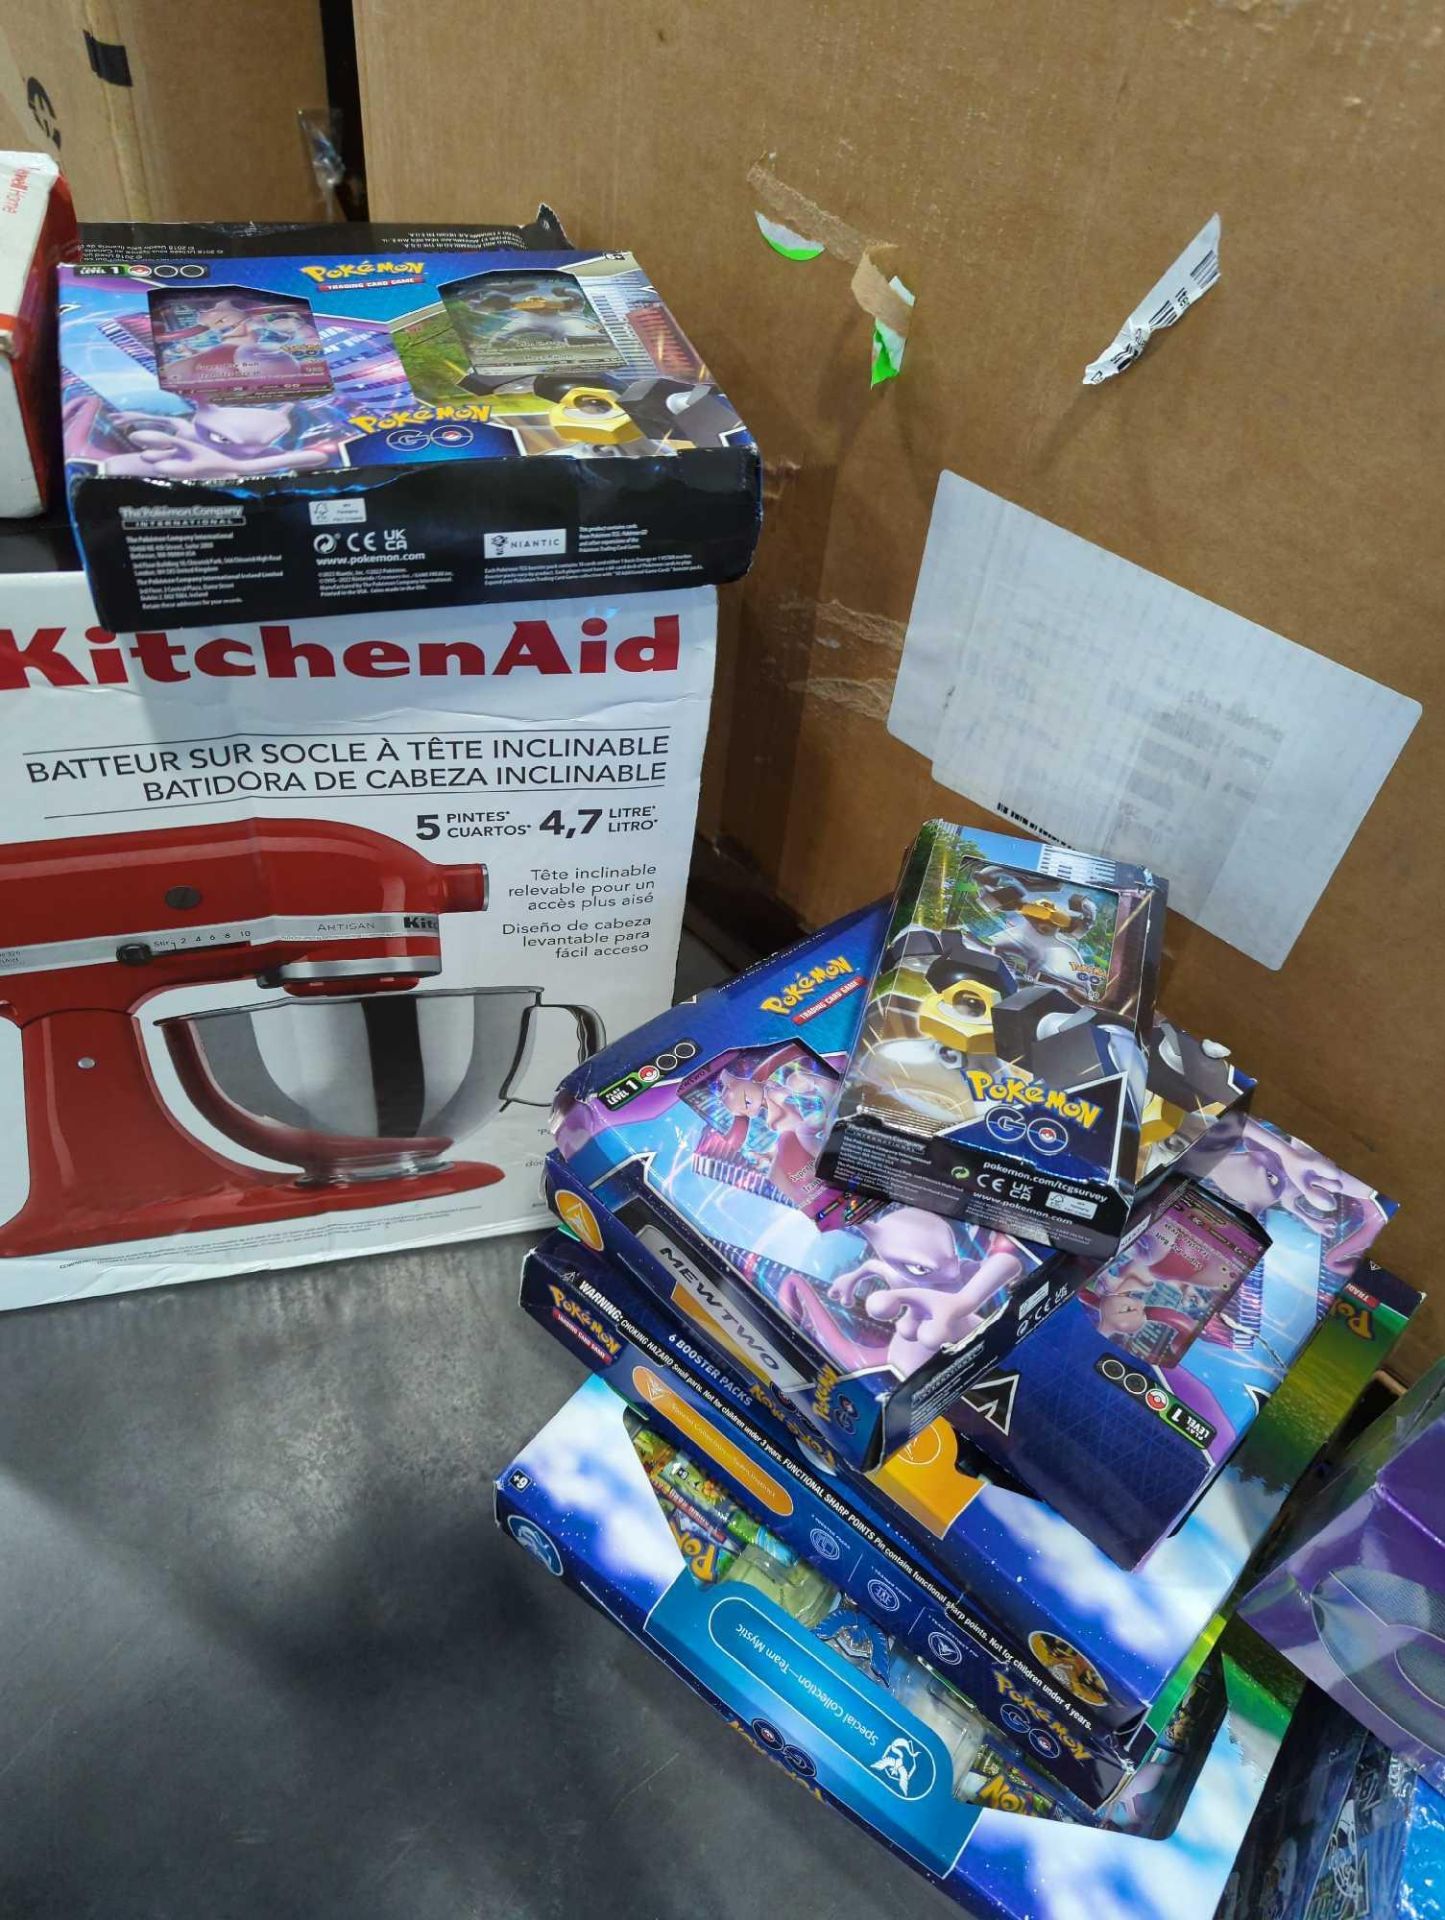 Kitchenaid stand mixer, pokemon cards, and more - Image 18 of 18